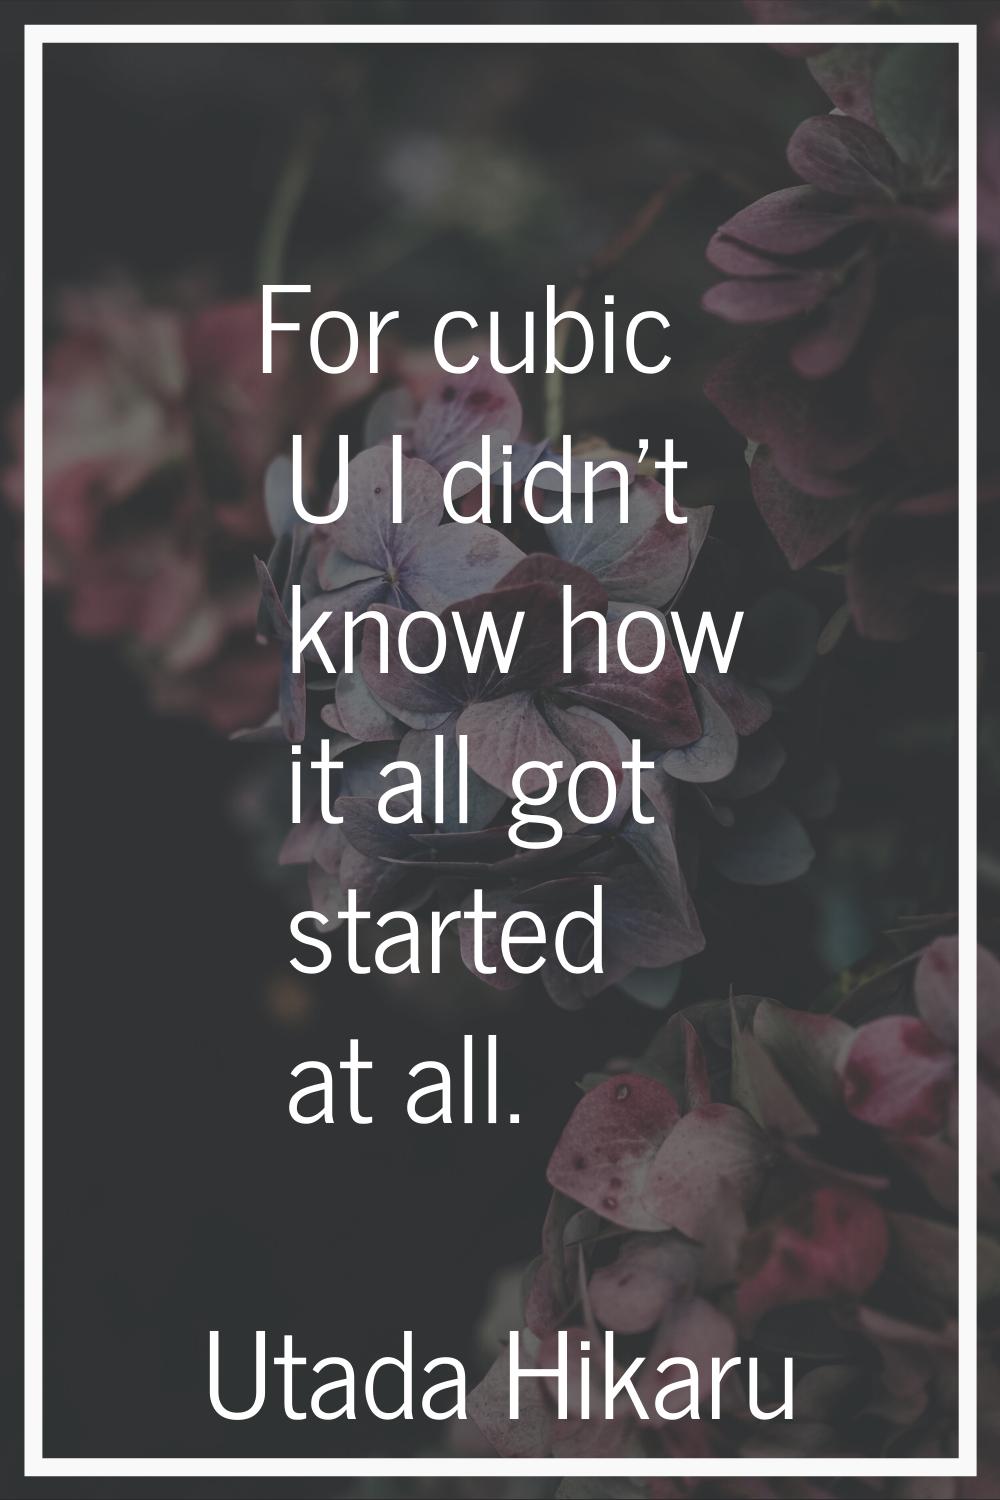 For cubic U I didn't know how it all got started at all.